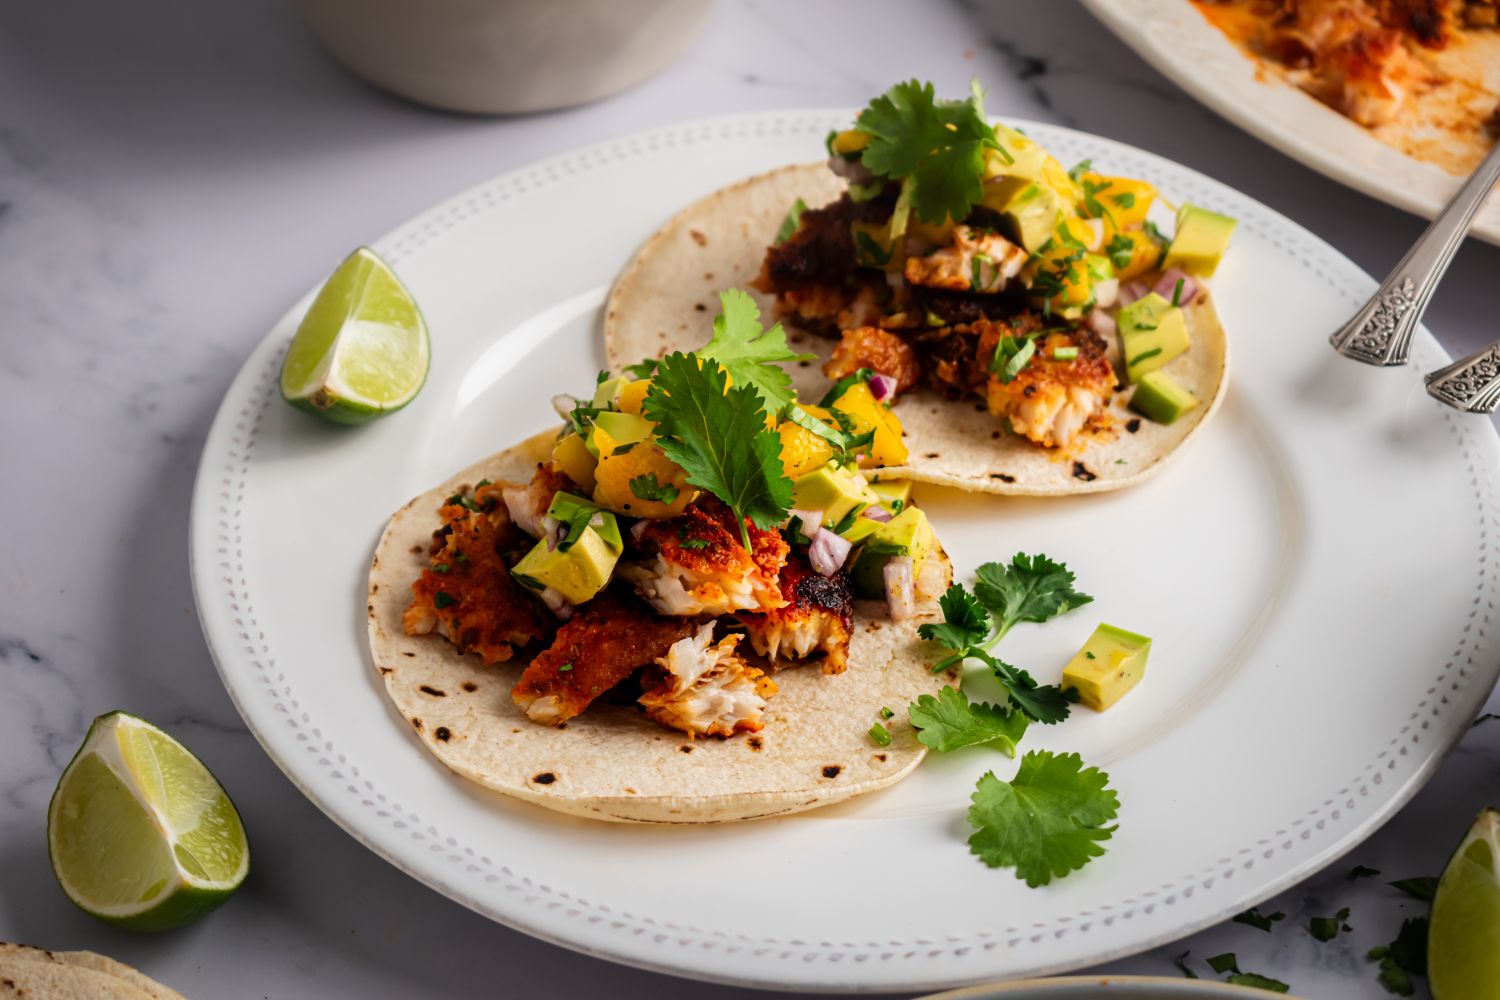 Blackened fish tacos served on corn tortillas with avocado and mango salsa